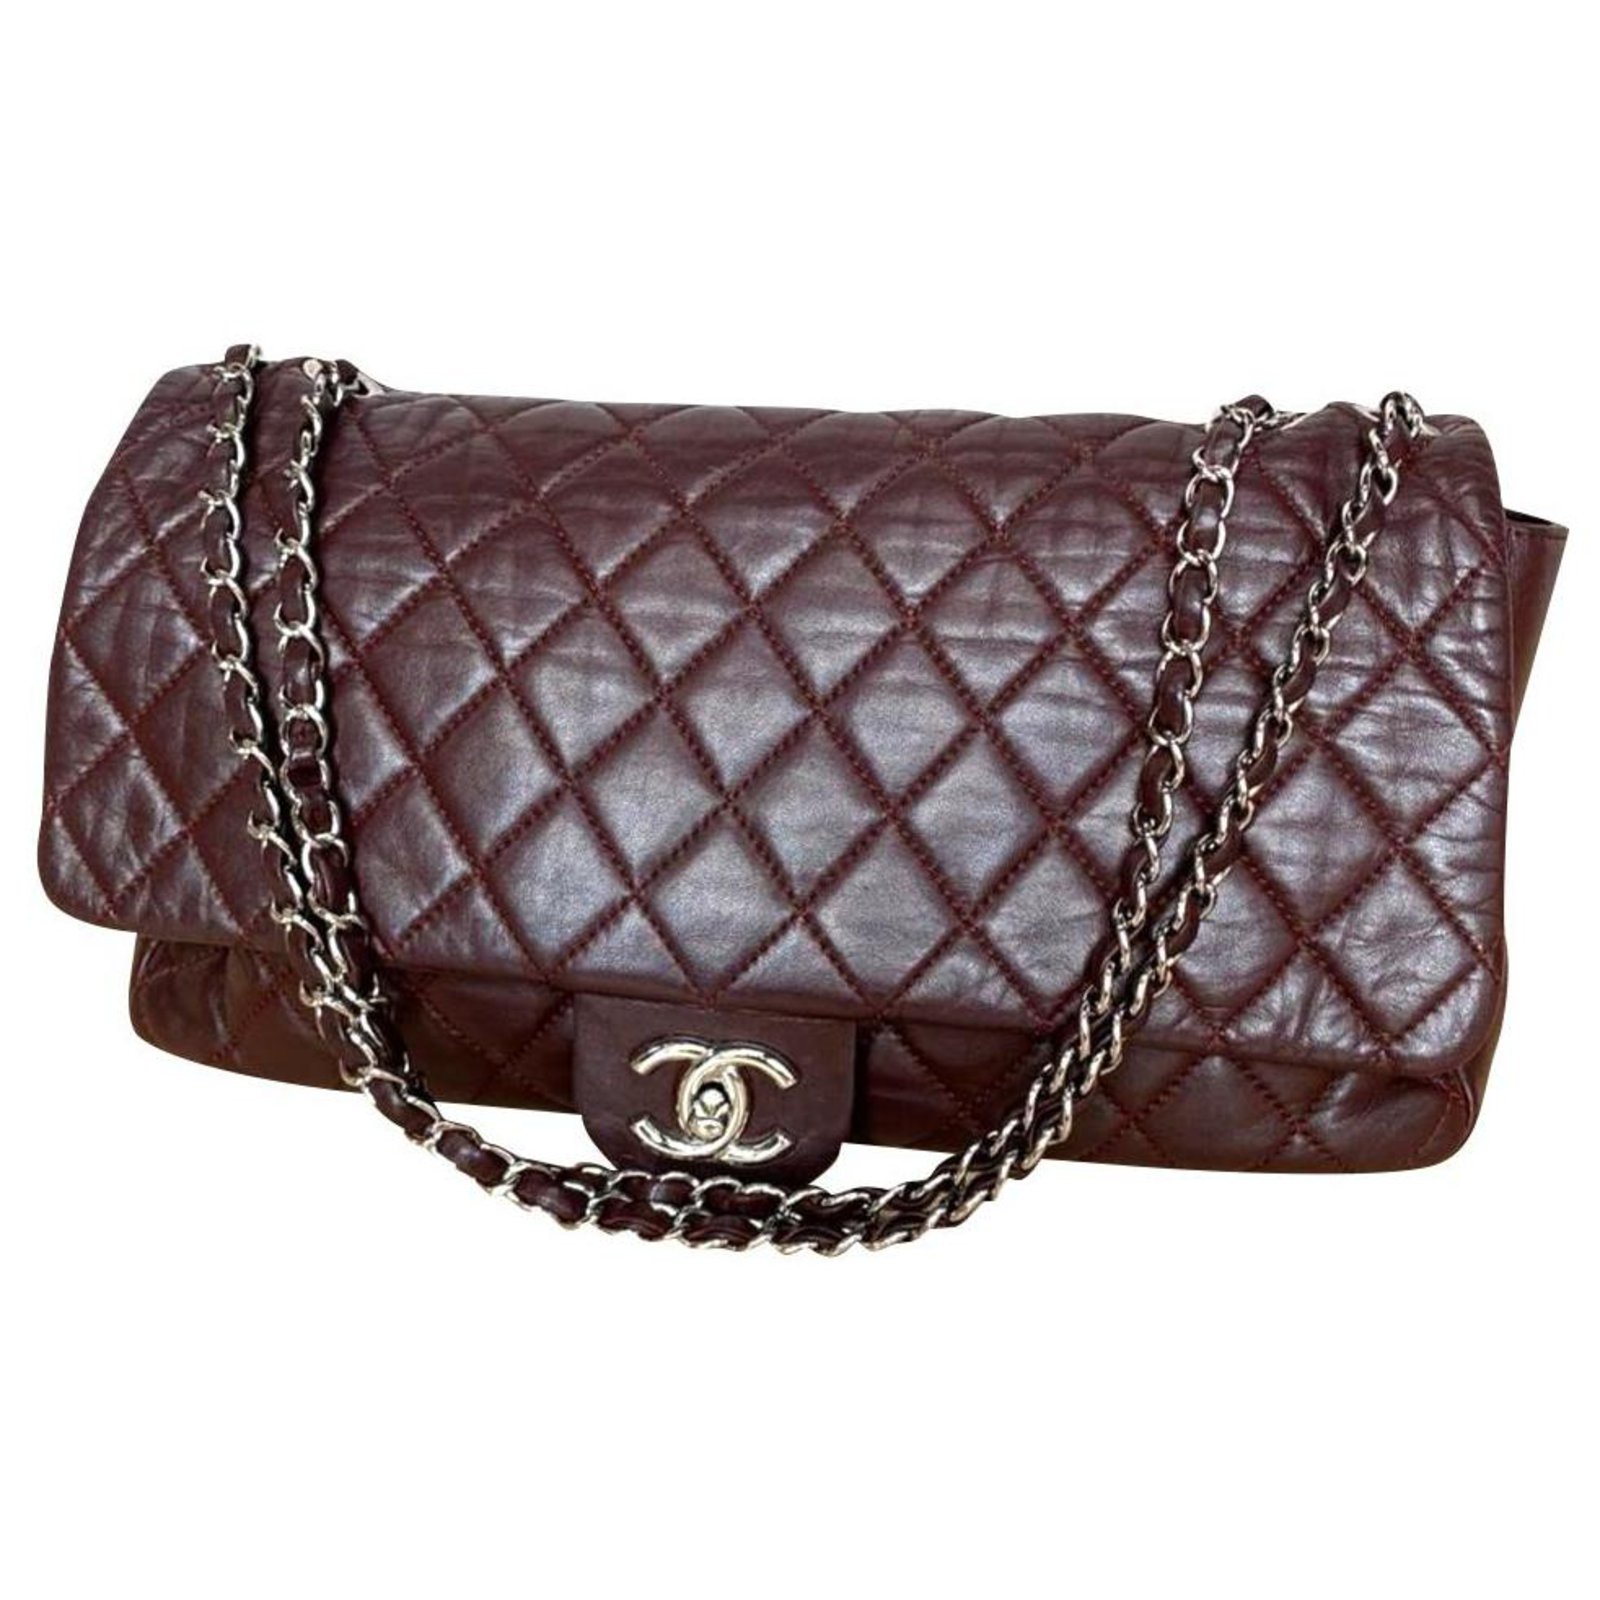 Chanel burgundy flap bag with rain cover